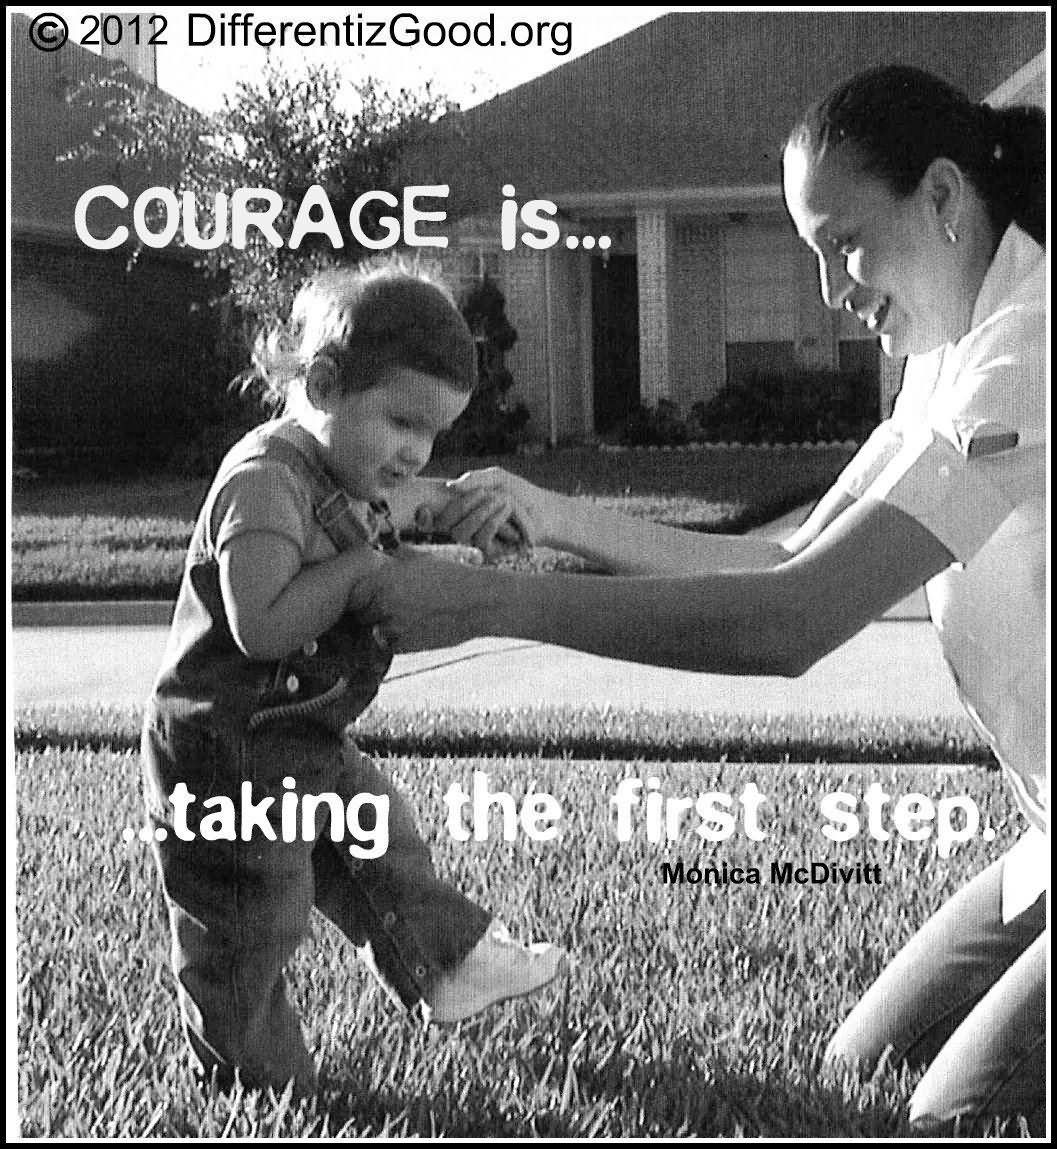 Courage is taking the first step.